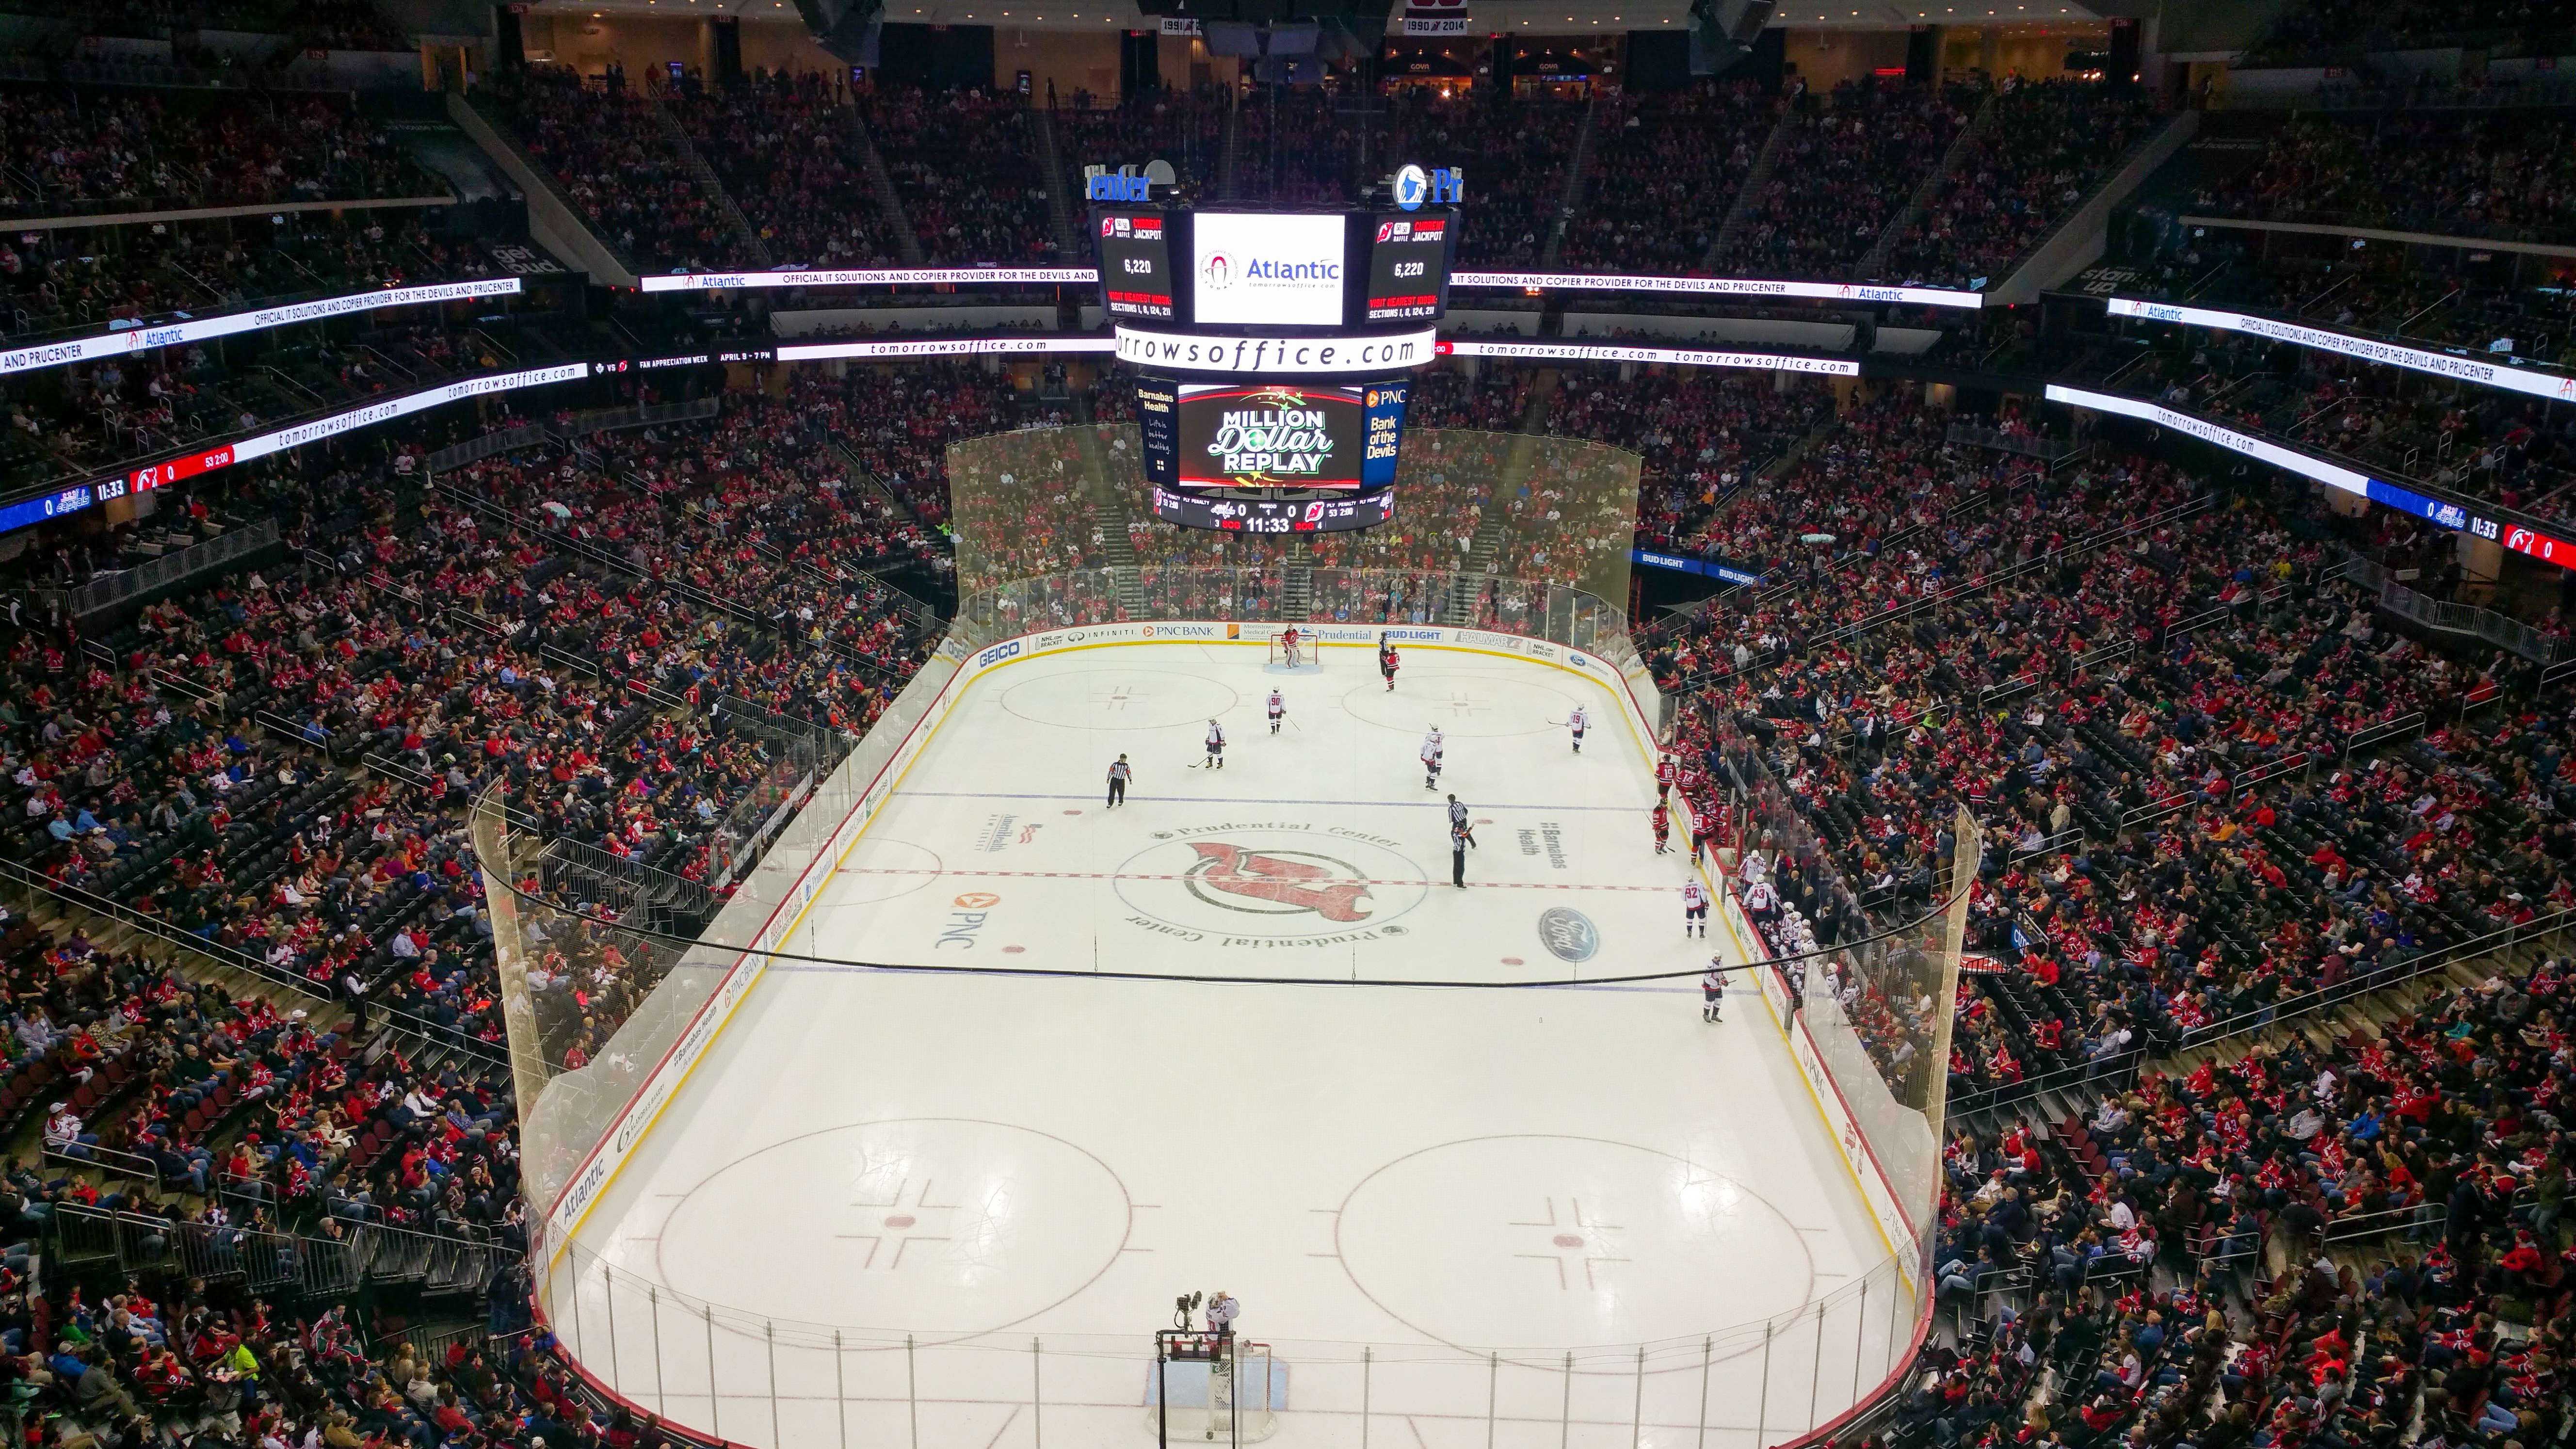 A picture of the interior of the Prudential Center during a Devil game in 2016 with the old videoboard.